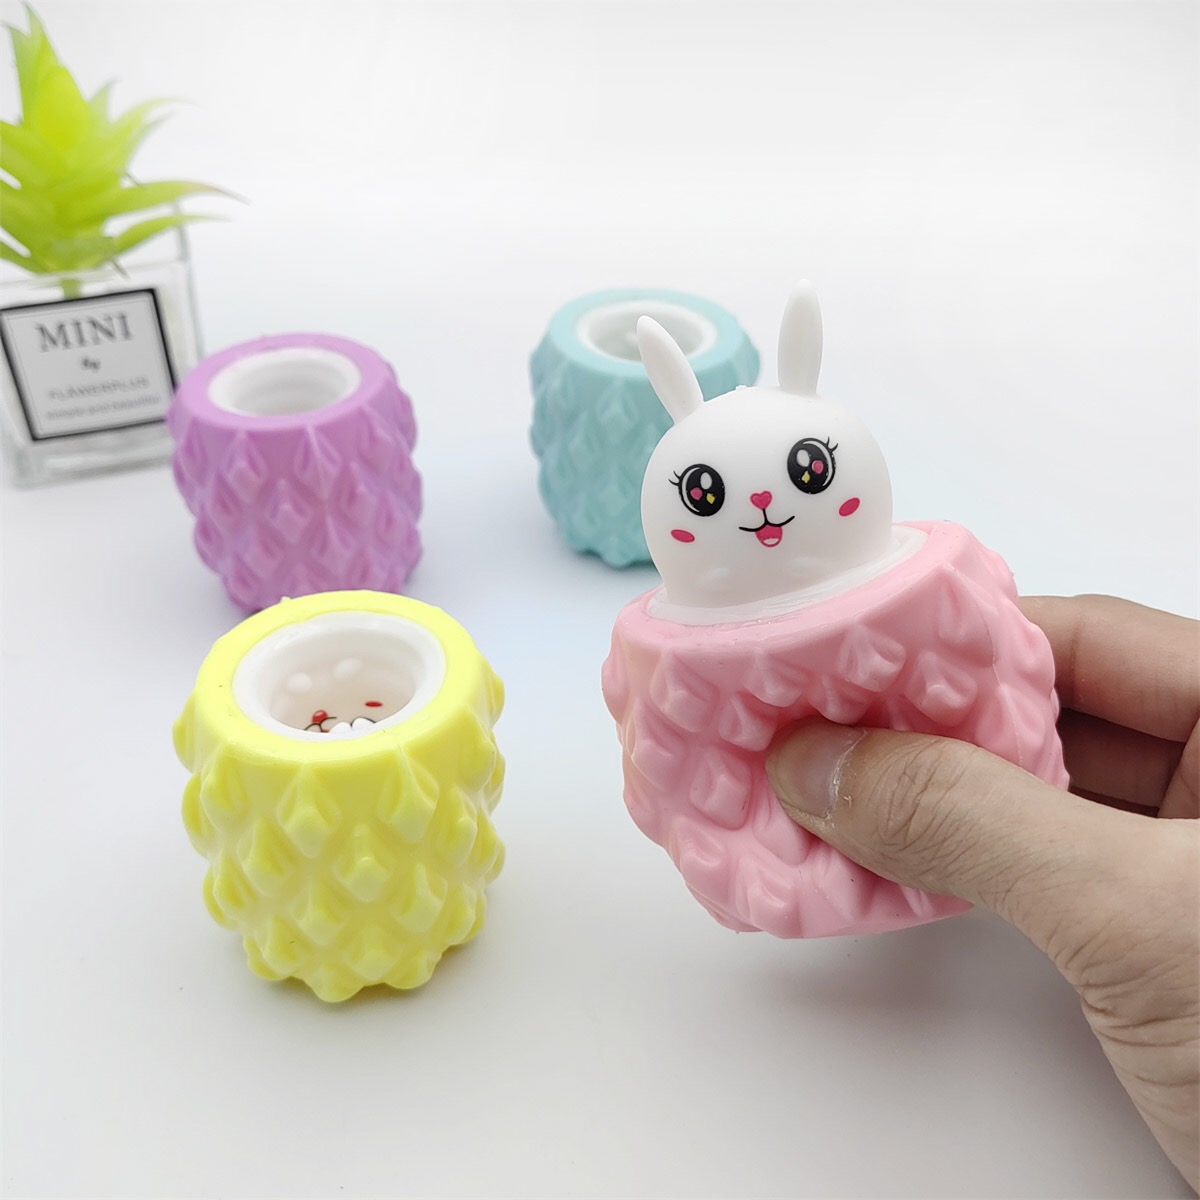 Dekompression Toy Magic Squirrel Stress Relief Toy Surprise Pineapple Rabbit Squirrel Cup for Annstest Relief Sensory Toy Squeeze Surprises